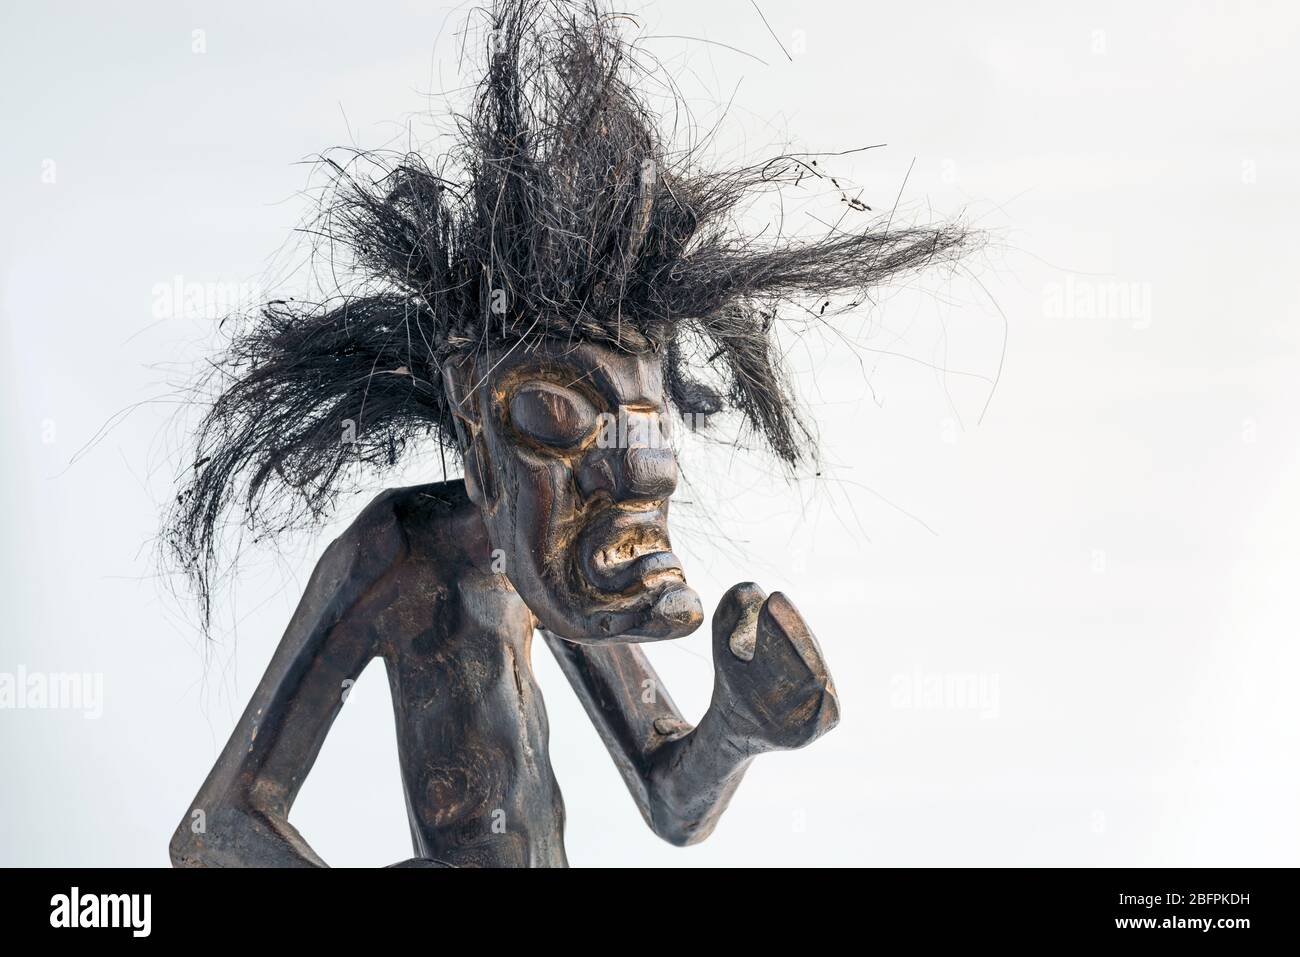 Wooden carved figure of primitive man wearing straw skirt & long black tousled hair. Concept; Bad hair day, difference, native, wild, unkempt, scary. Stock Photo